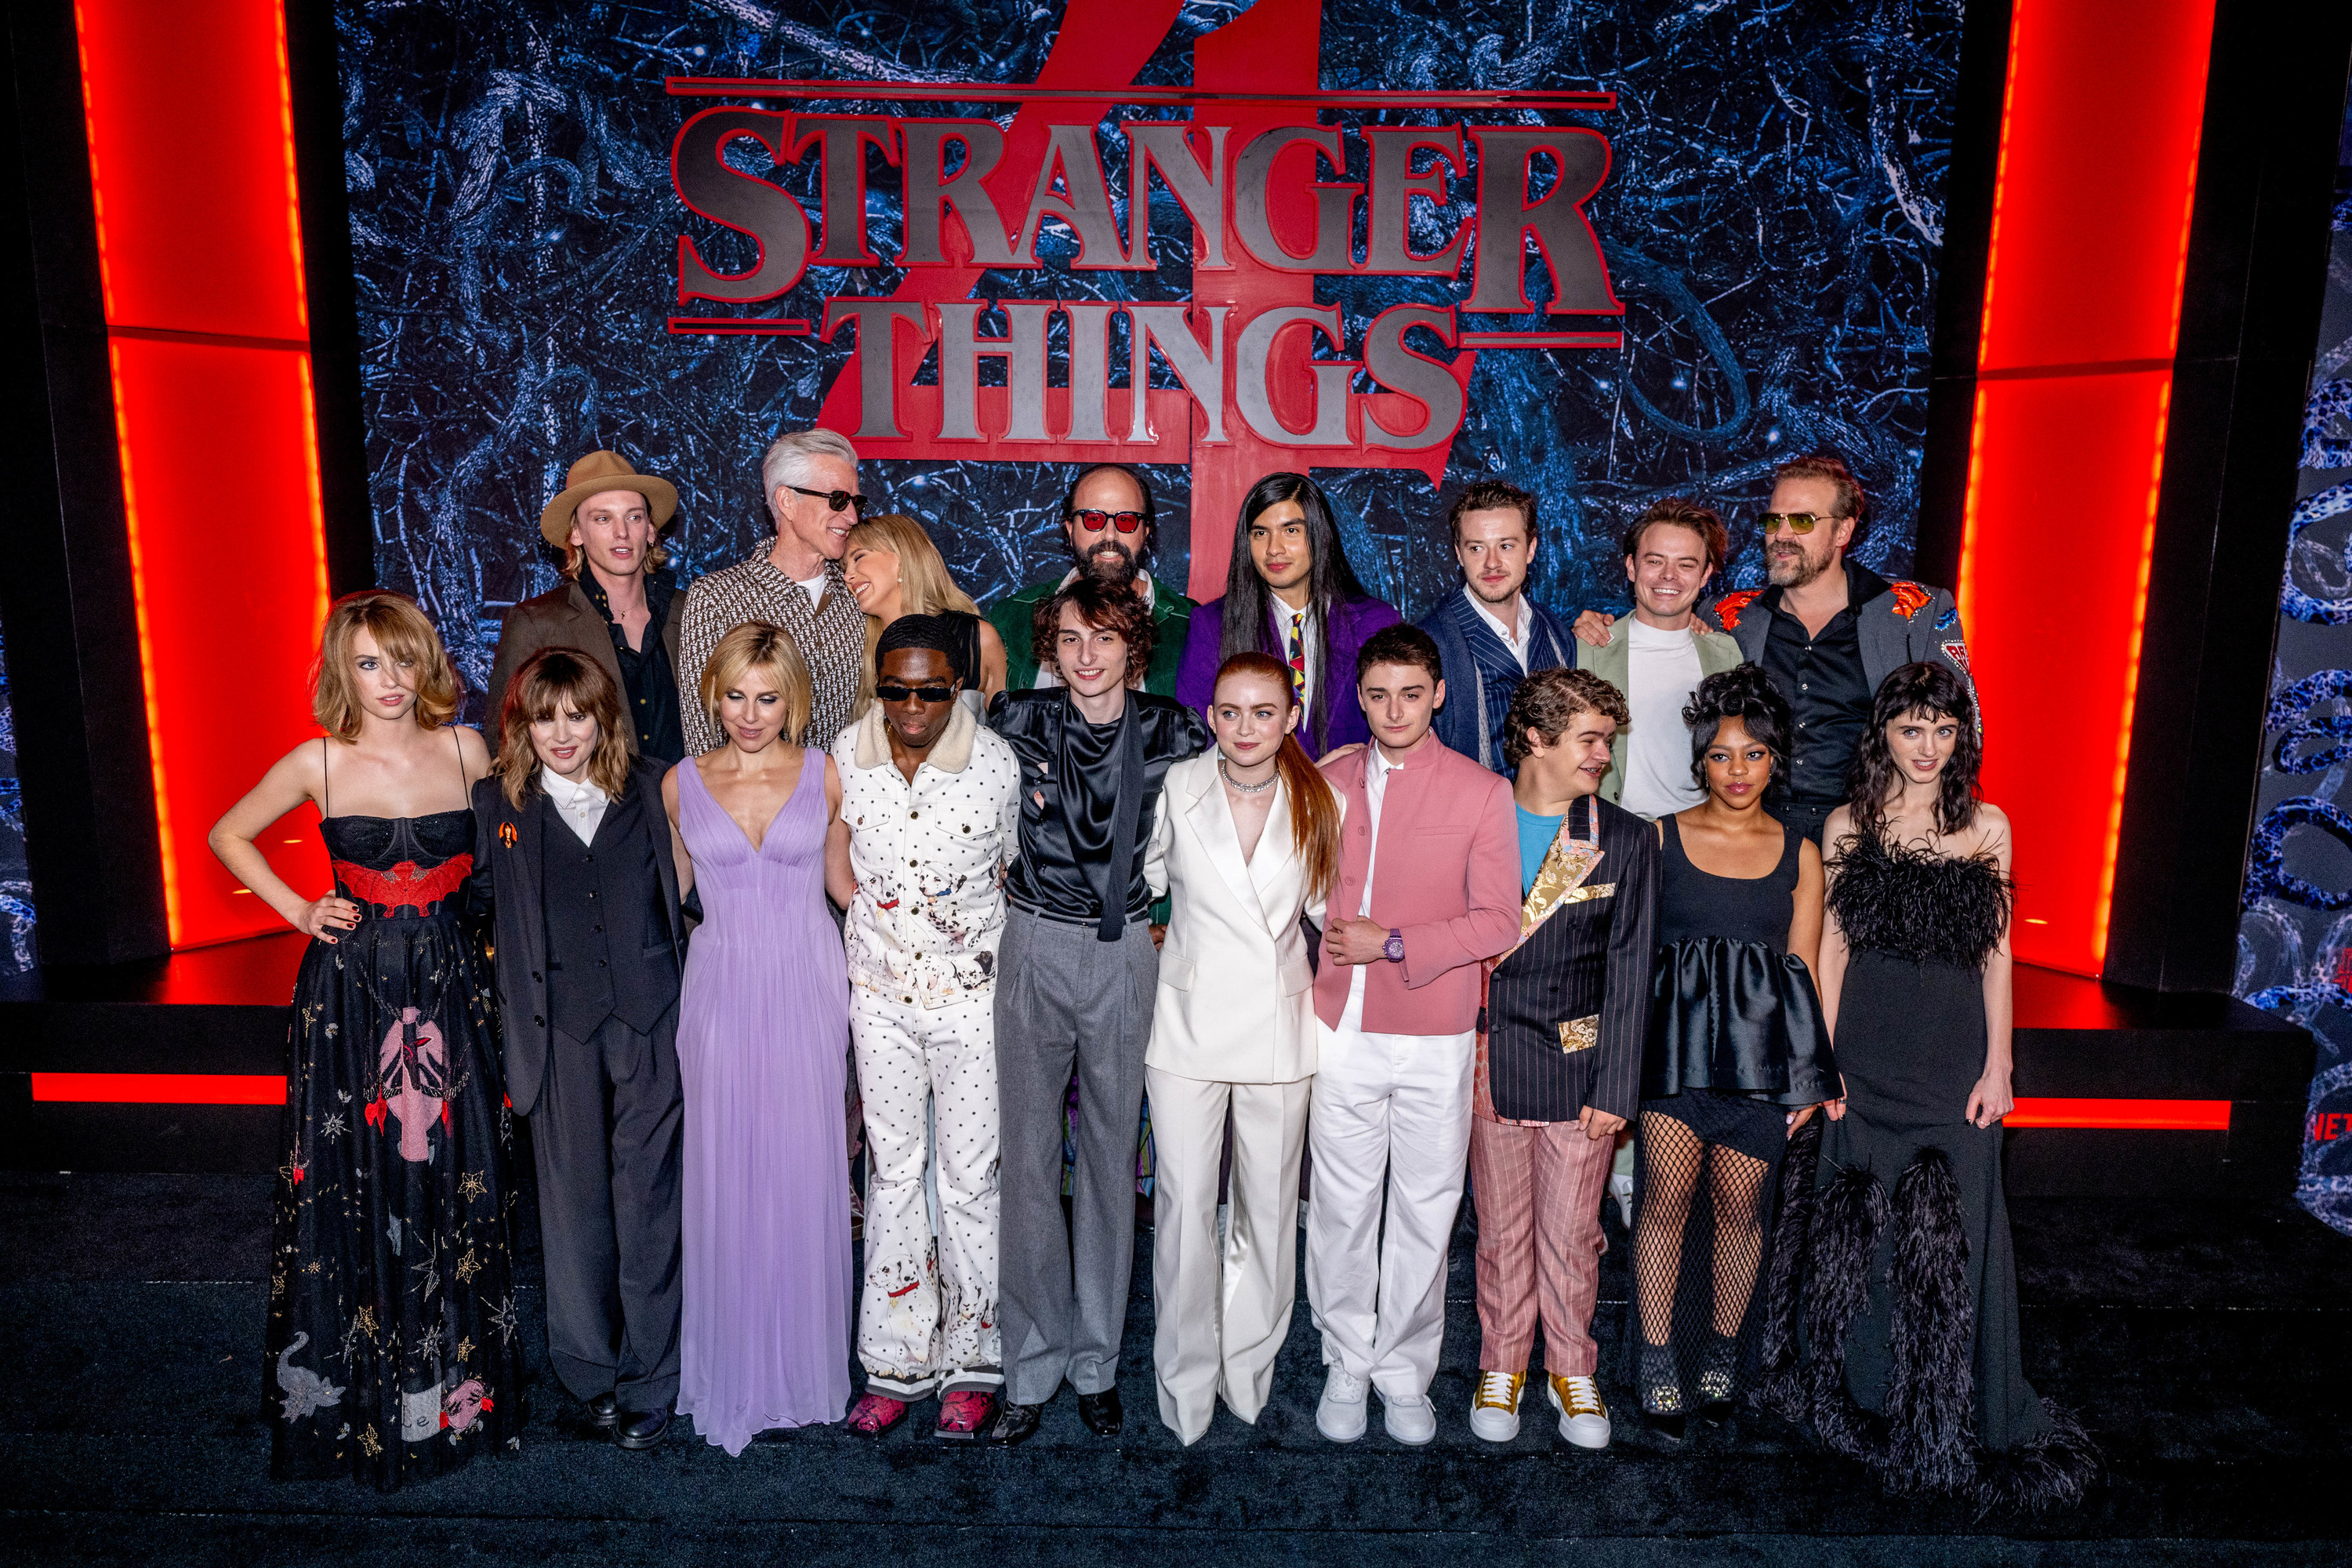 Millie Bobby Brown at Stranger Things Season 1 Premiere, The Stranger  Things Cast Has Changed So Much Since Their First Premiere, It's Truly  Shocking